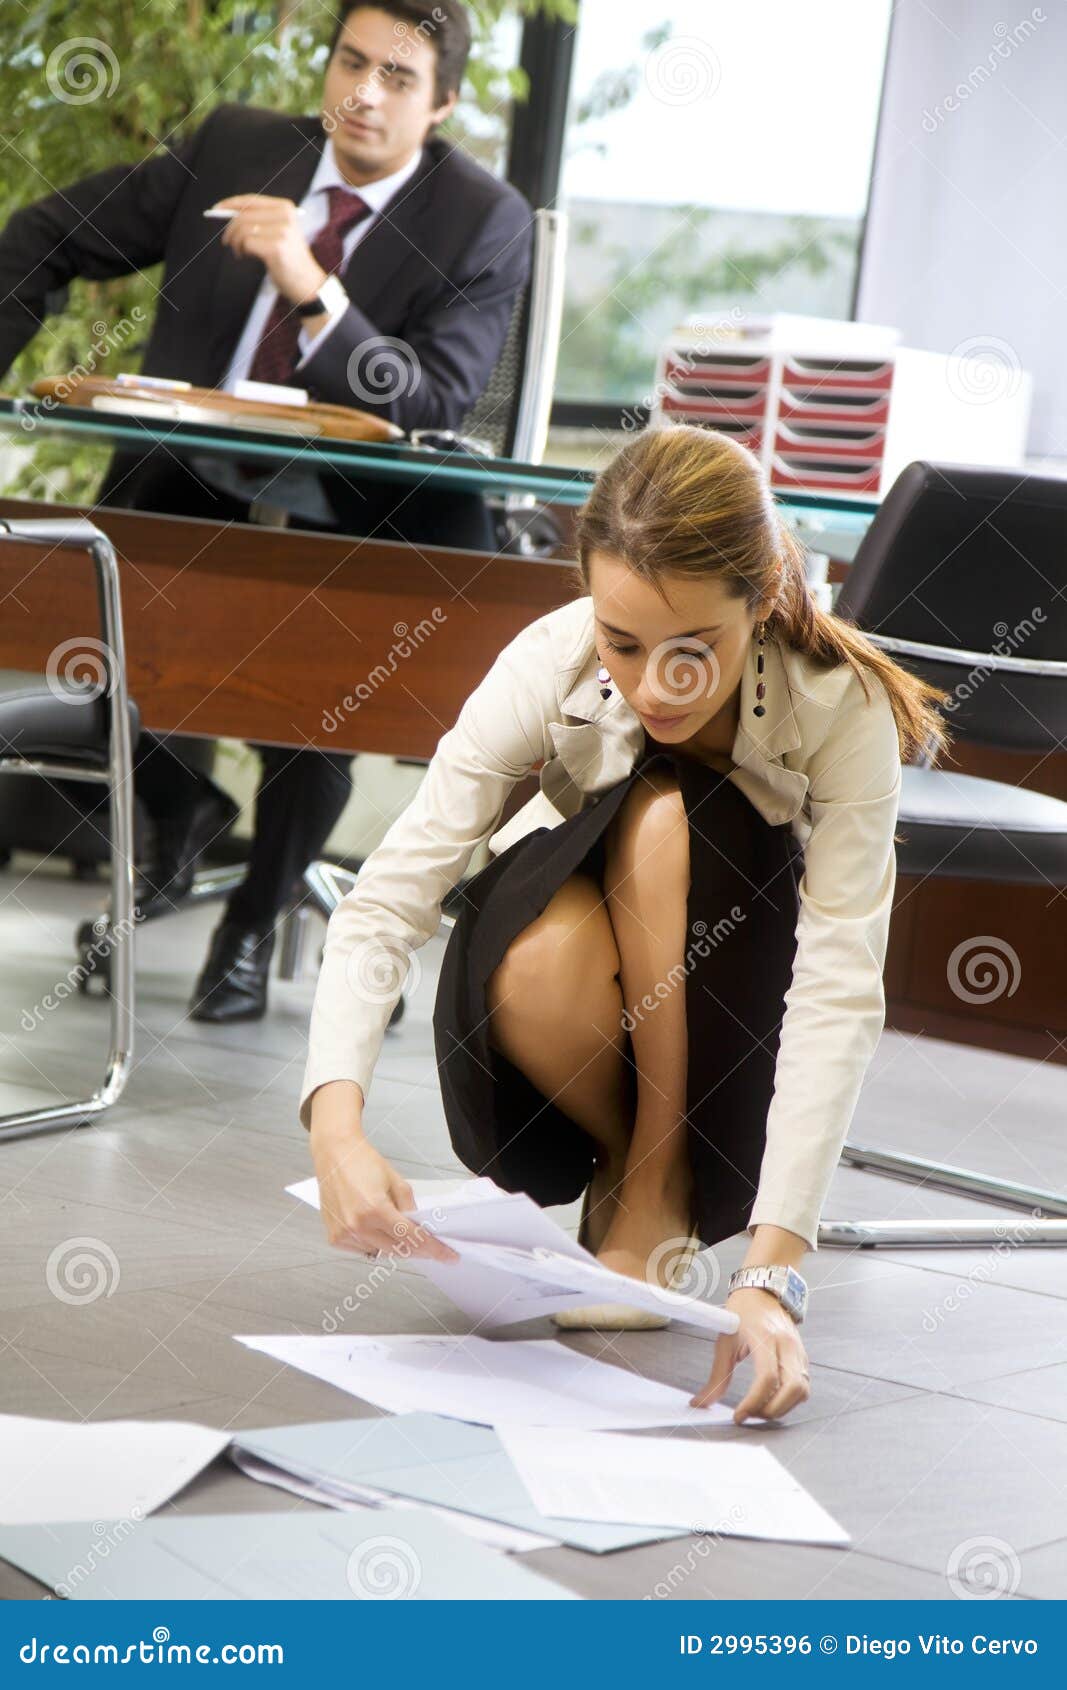 Office life stock photo. Image of exhaustion, despair - 2995396